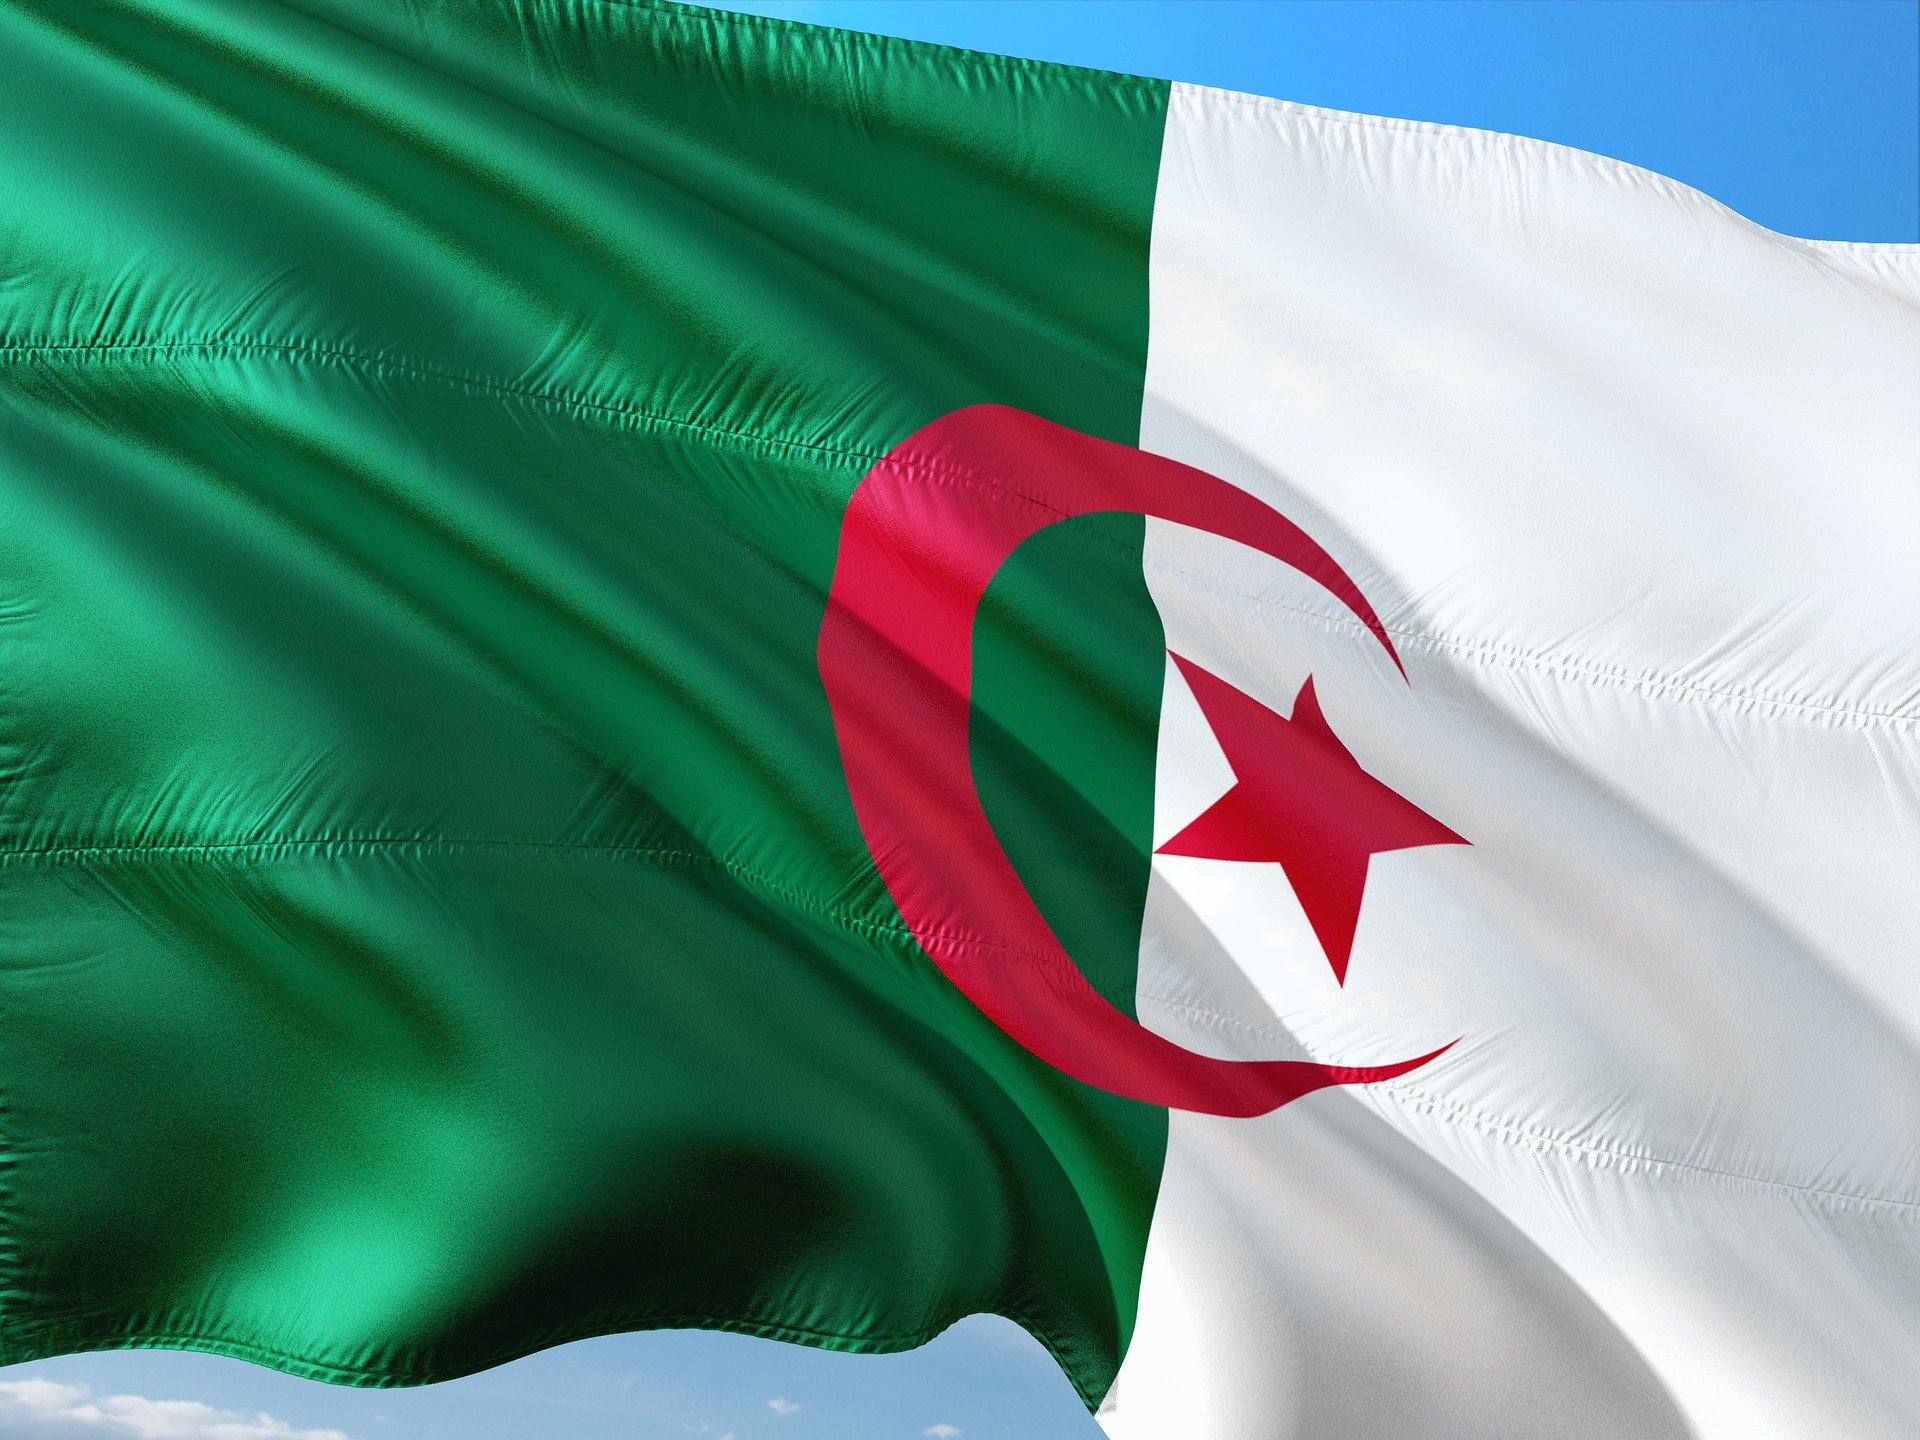 |Algerian tips for elections||